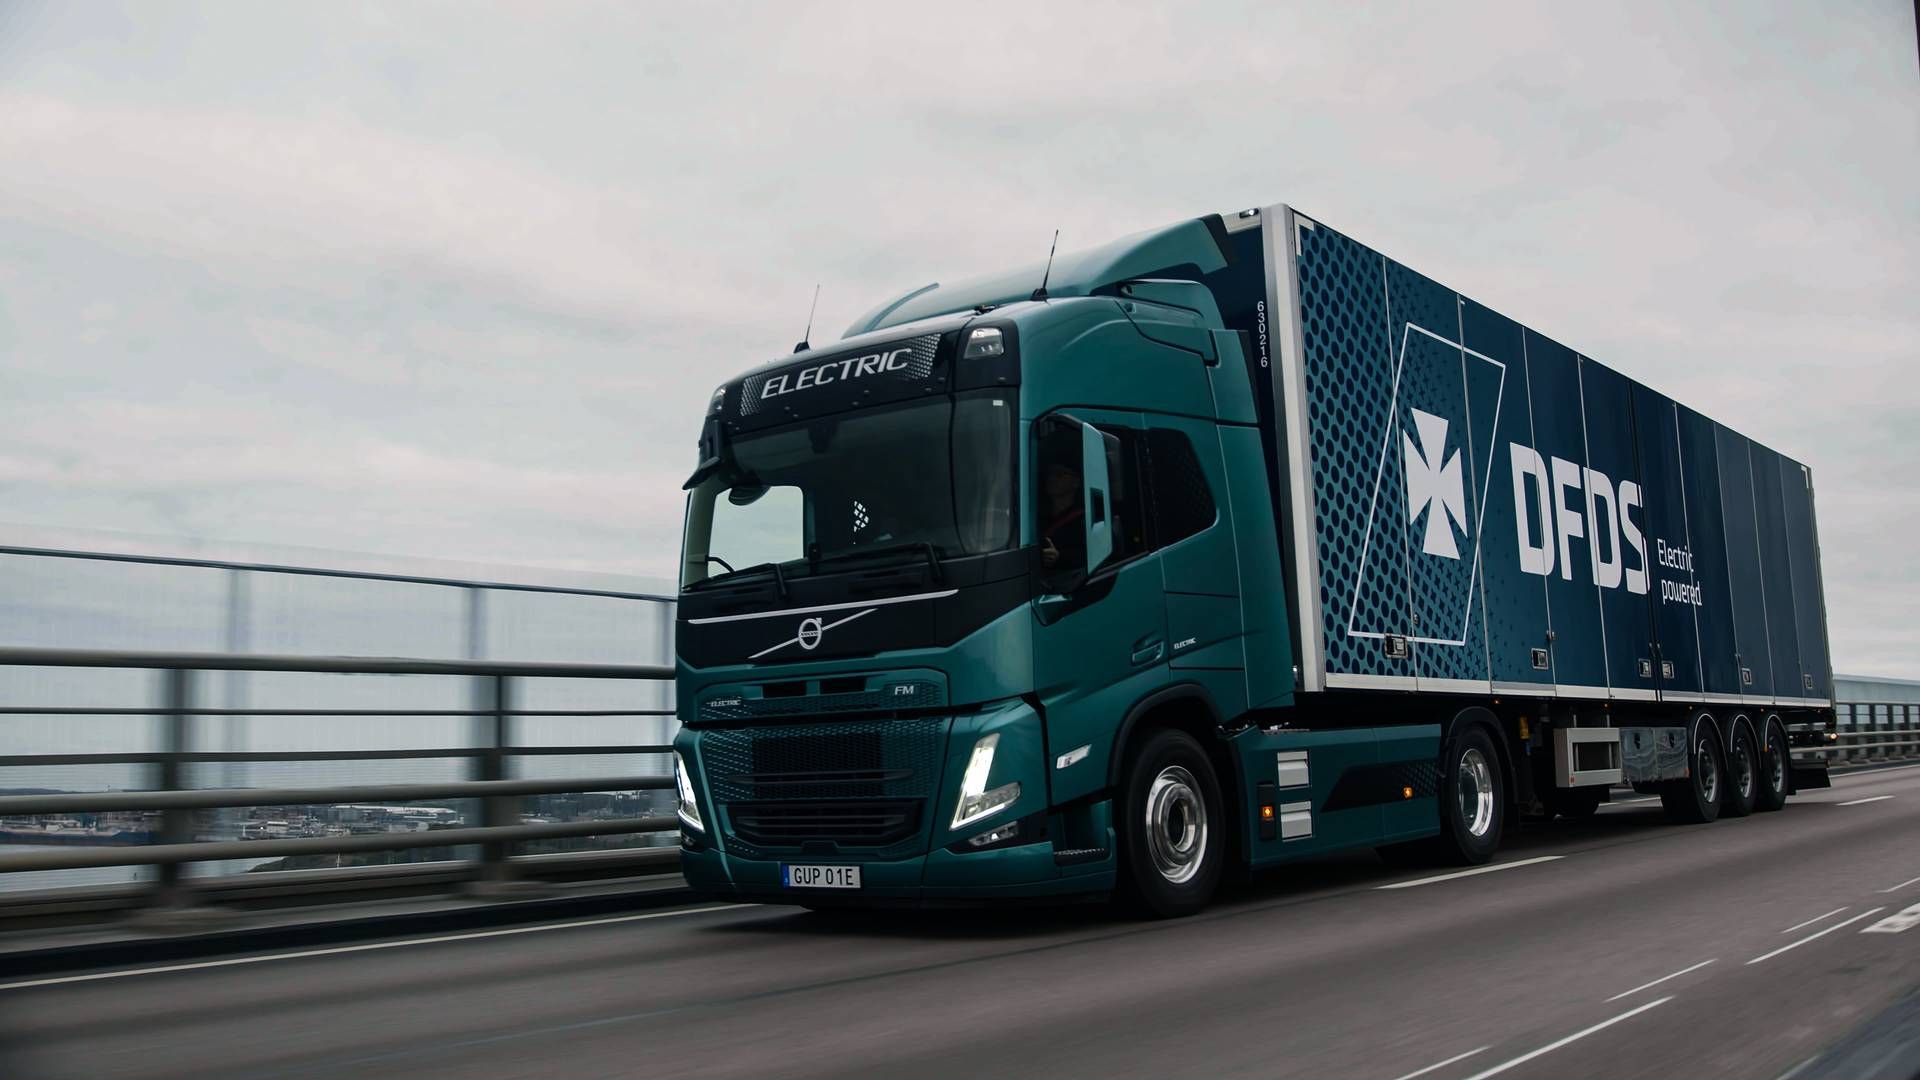 In the EU, an agreement has now been passed in the European Parliament for a massive expansion of the European charging network for e.g. electric trucks as seen in the picture here. | Photo: Pr / Dfds